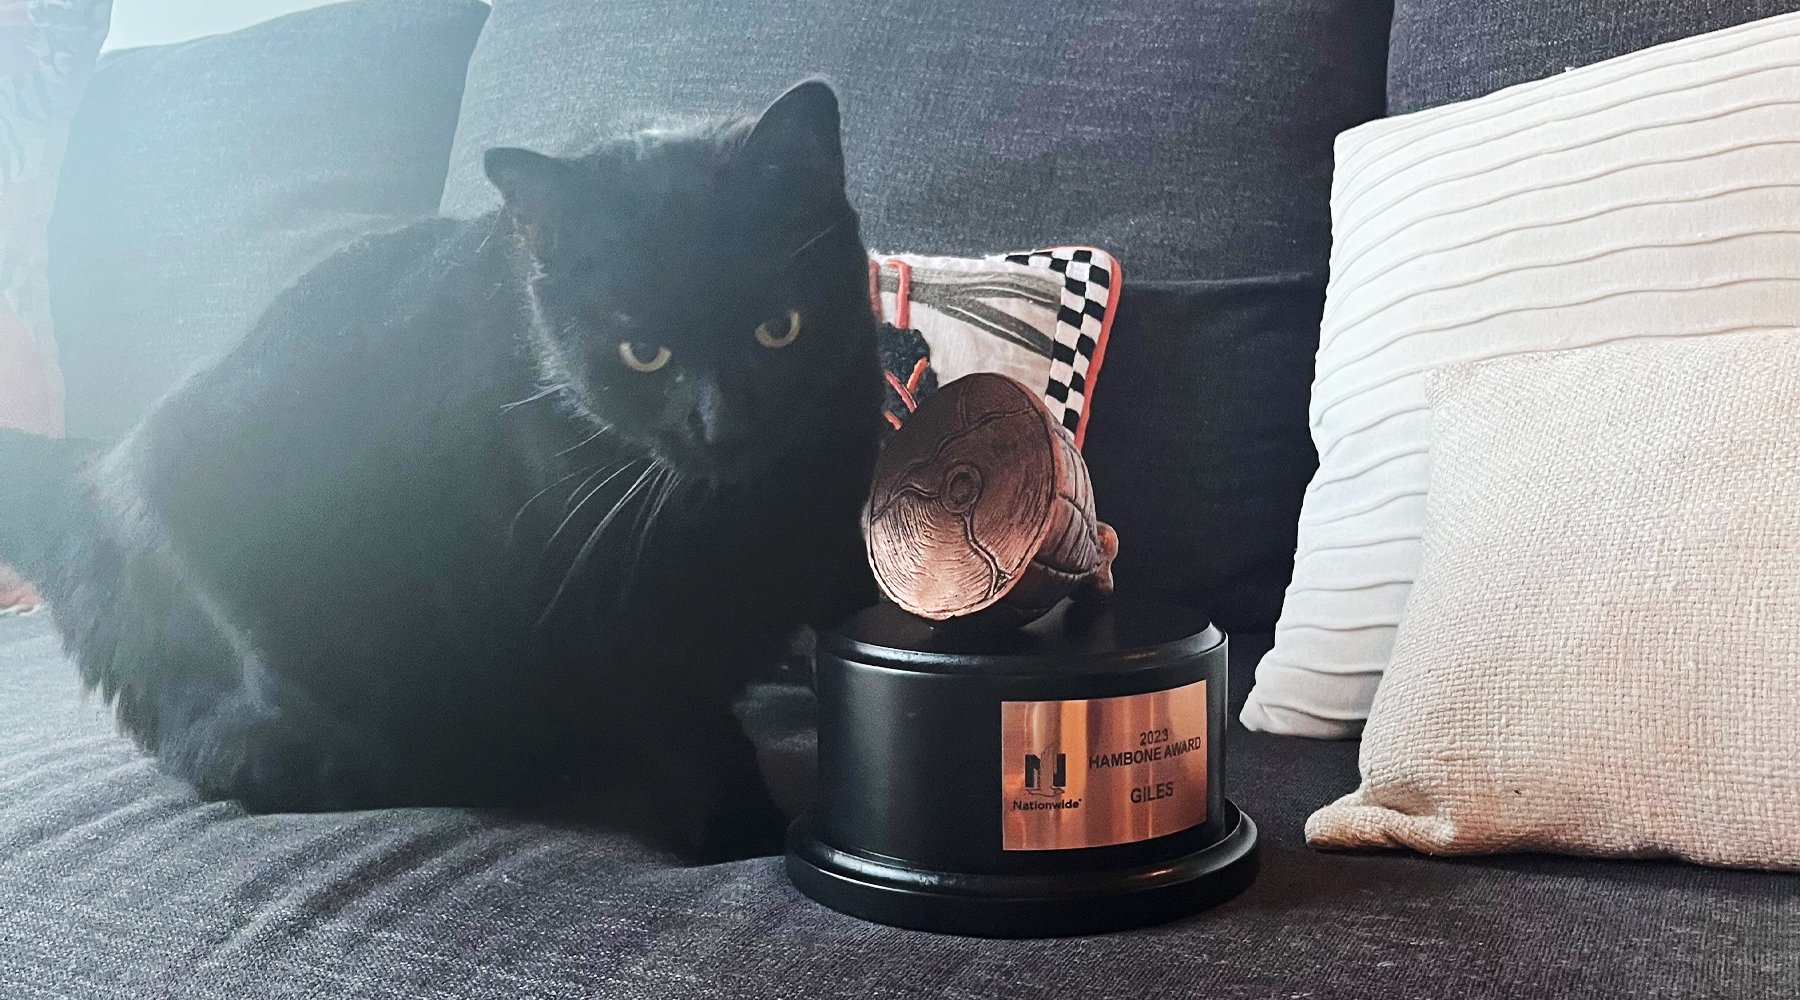 Giles the black cat sitting on a sofa next to the Hambone Award trophy